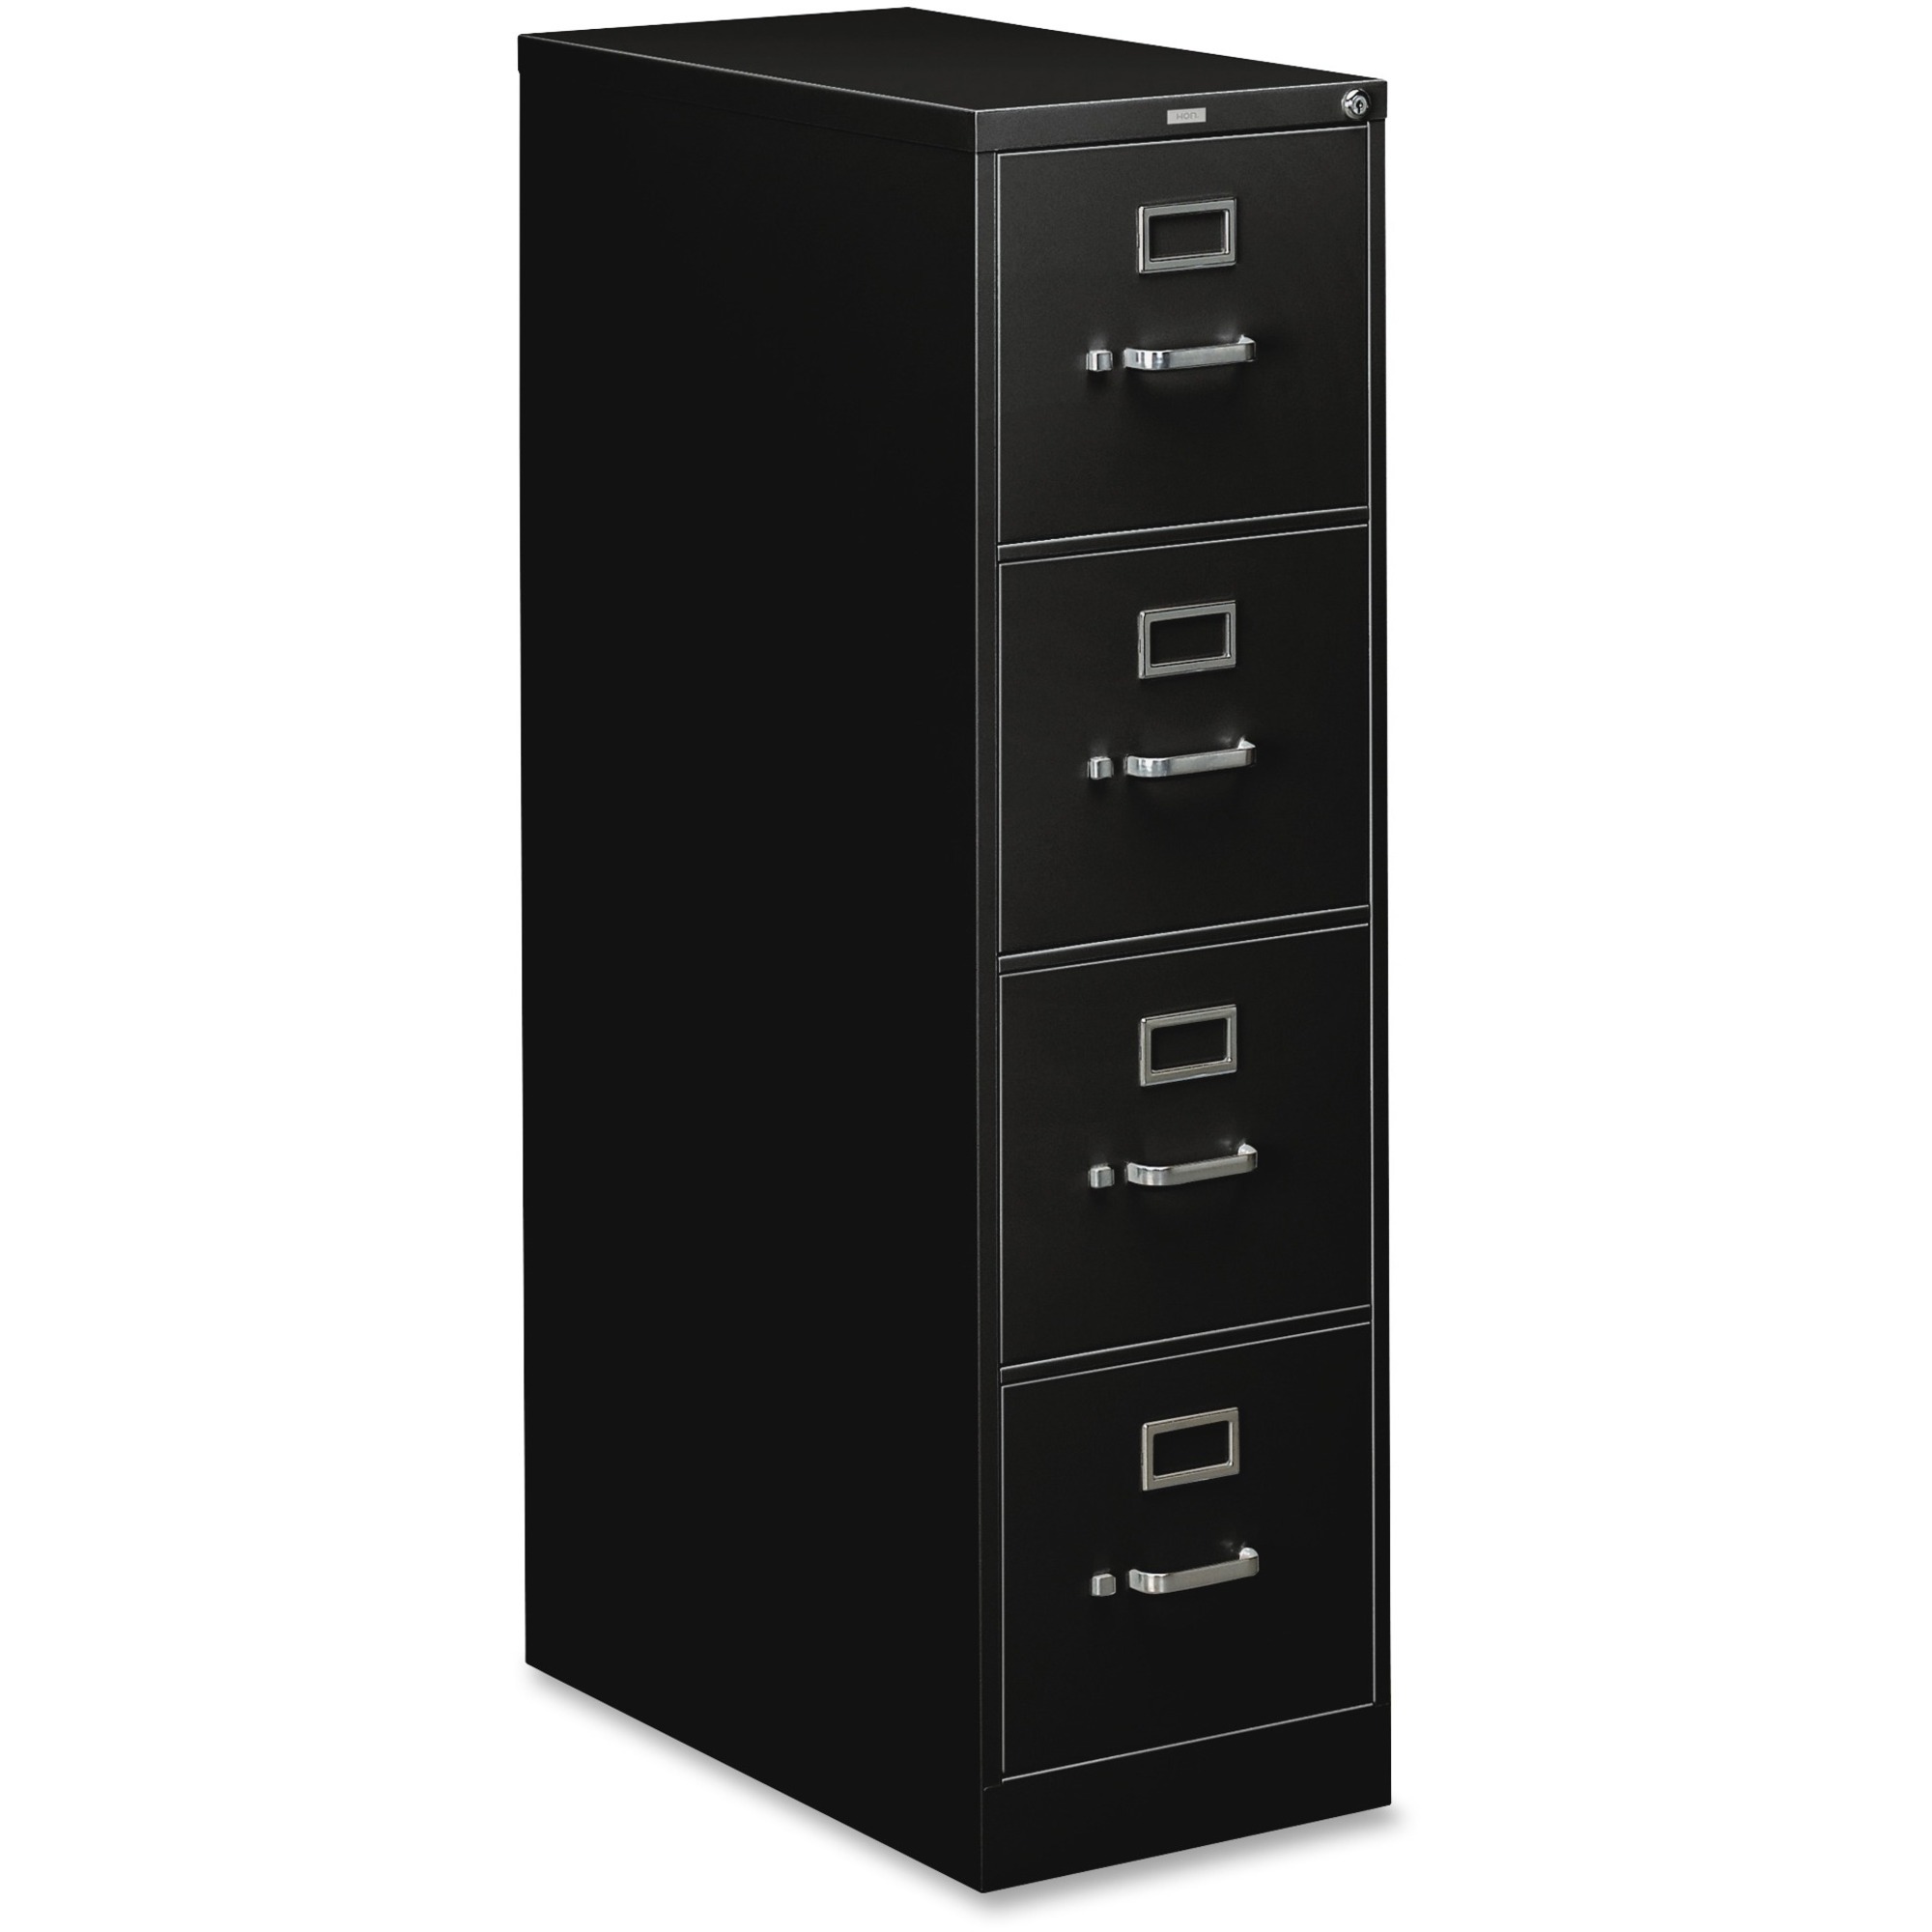 Hon 310 Series Vertical File With Lock Madill The Office Company